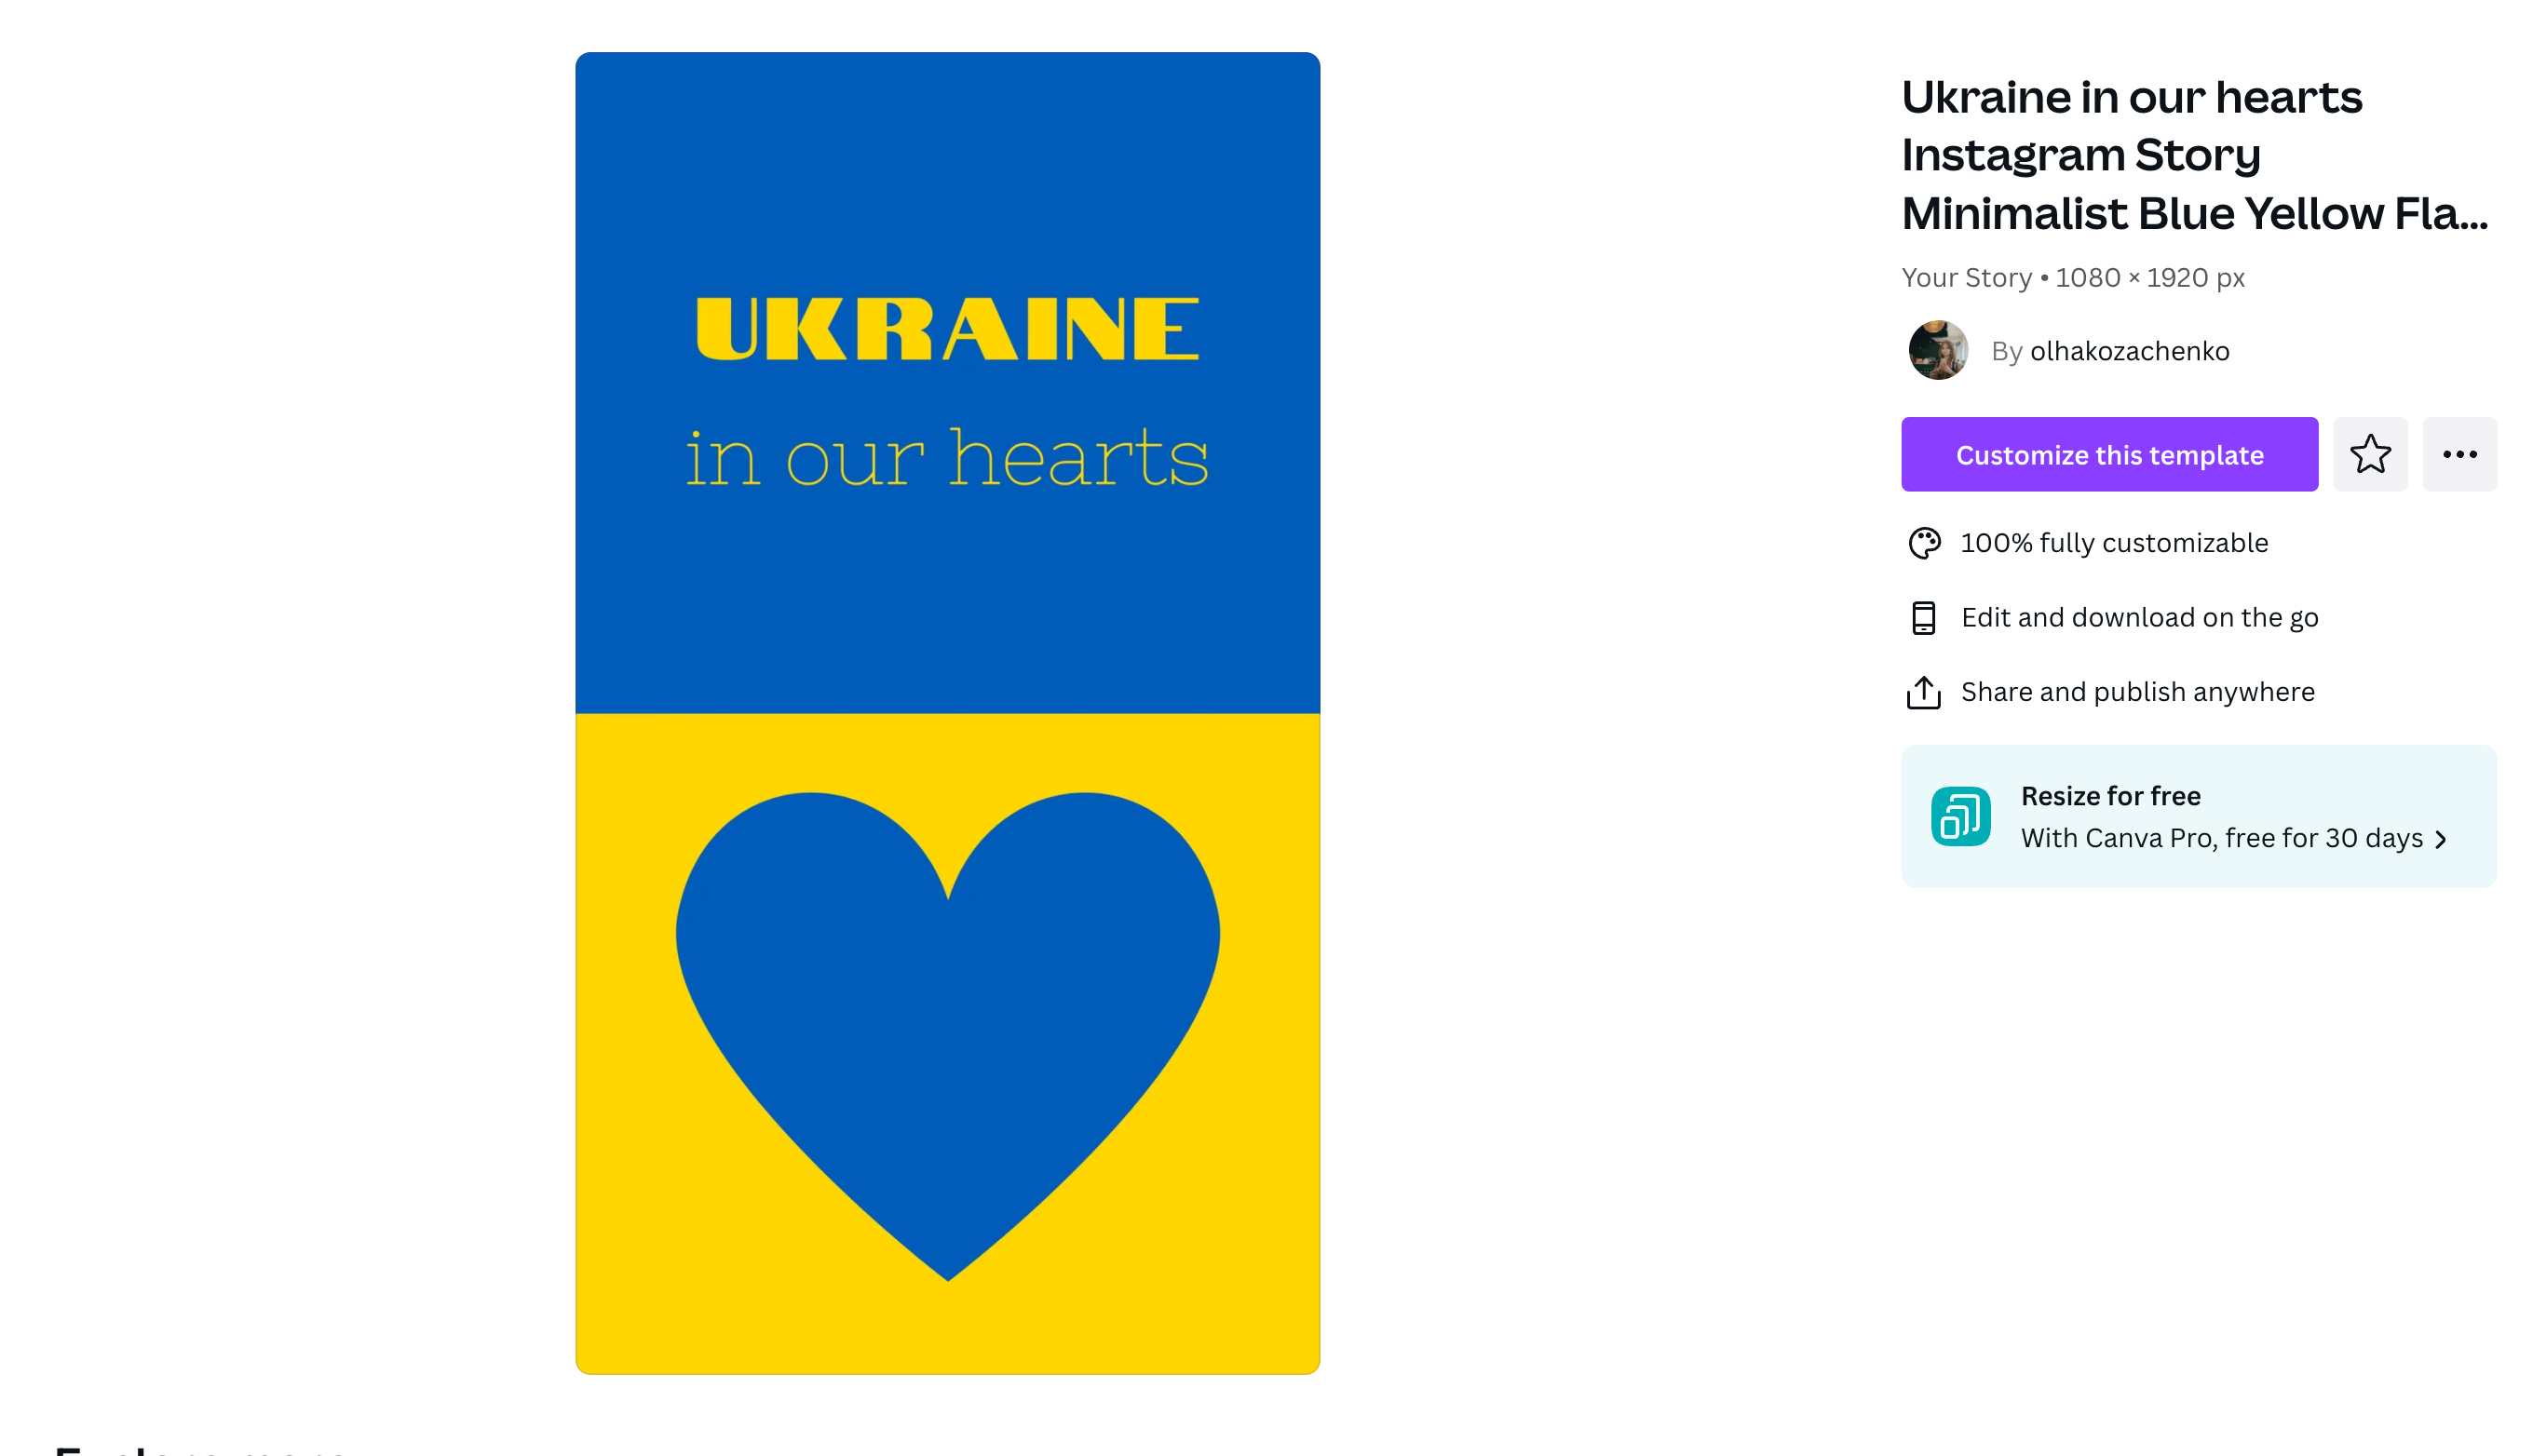 An Instagram Story that says "Ukraine in our hearts" over a background of the Ukrainian flag